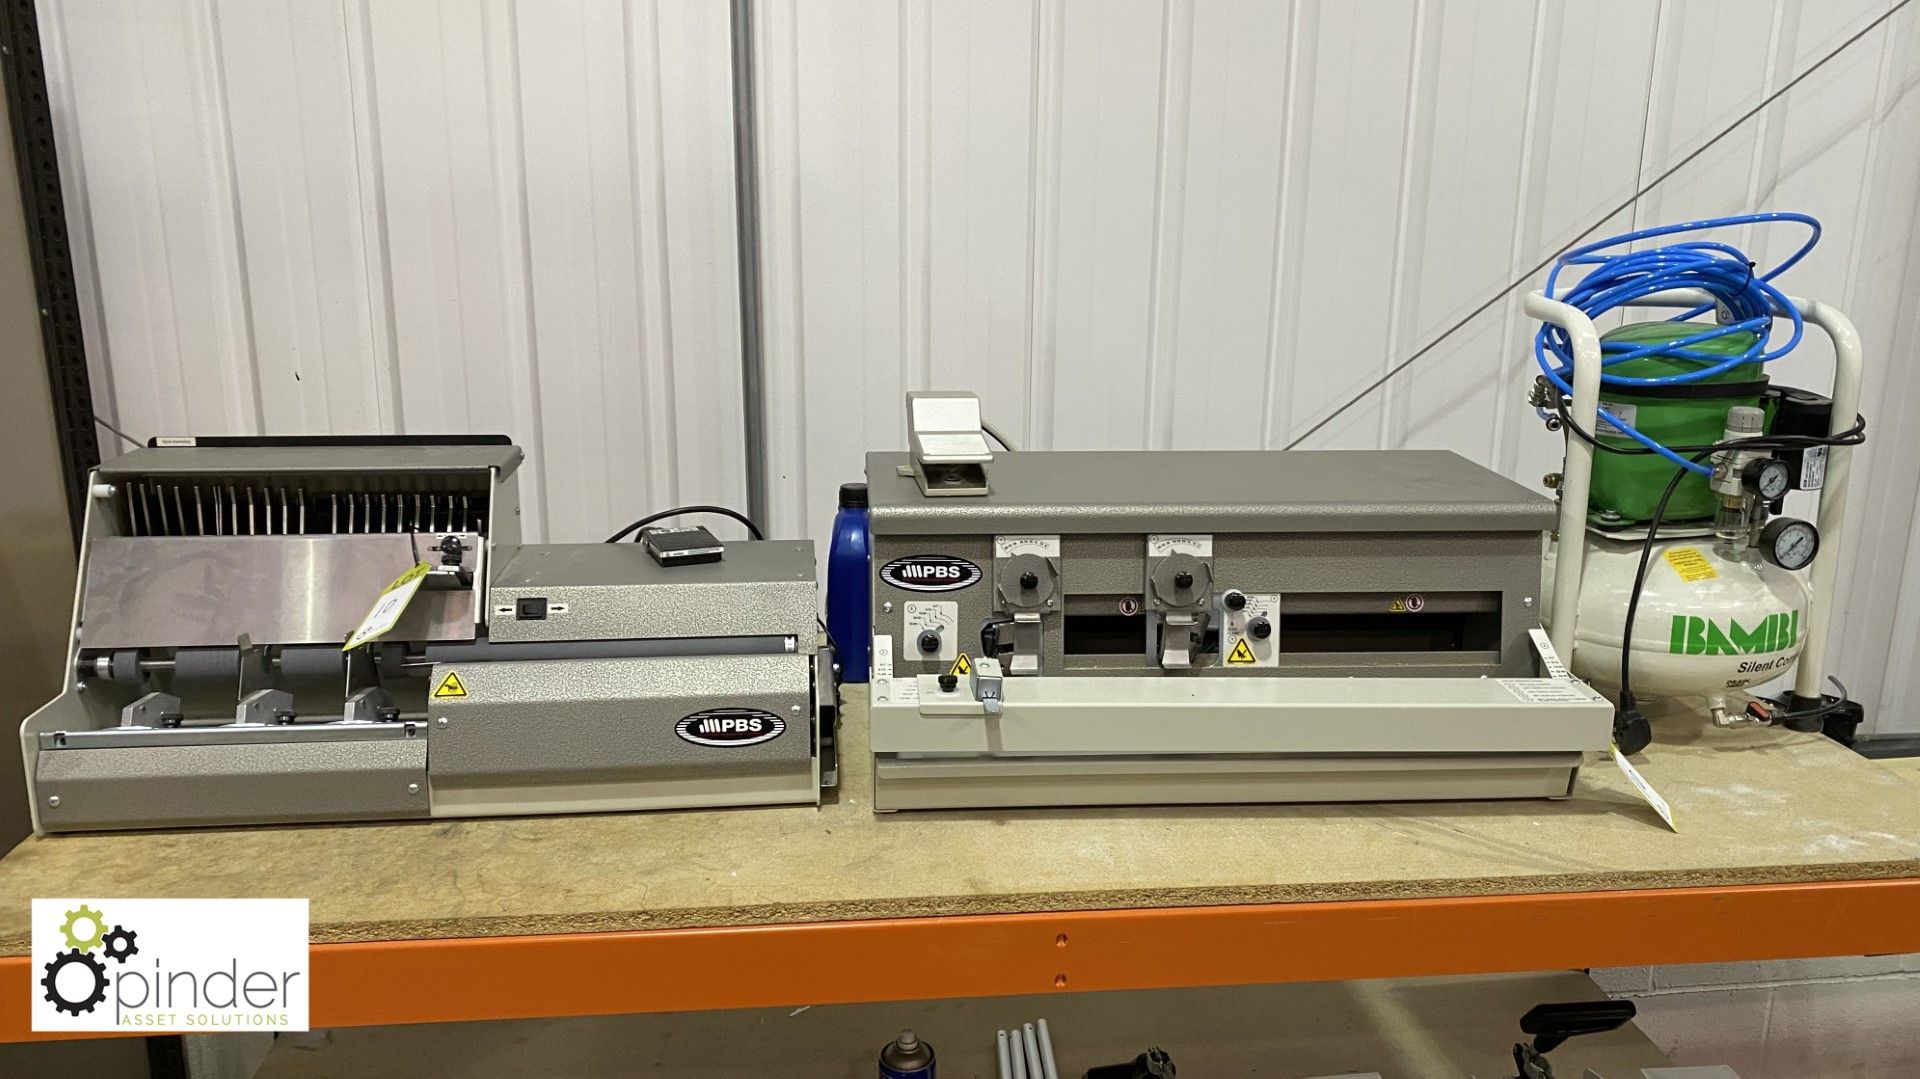 Gateway Bookbinding Systems PBS 1650 Total Koil Binder, 240volts, year 2016, serial number 027;